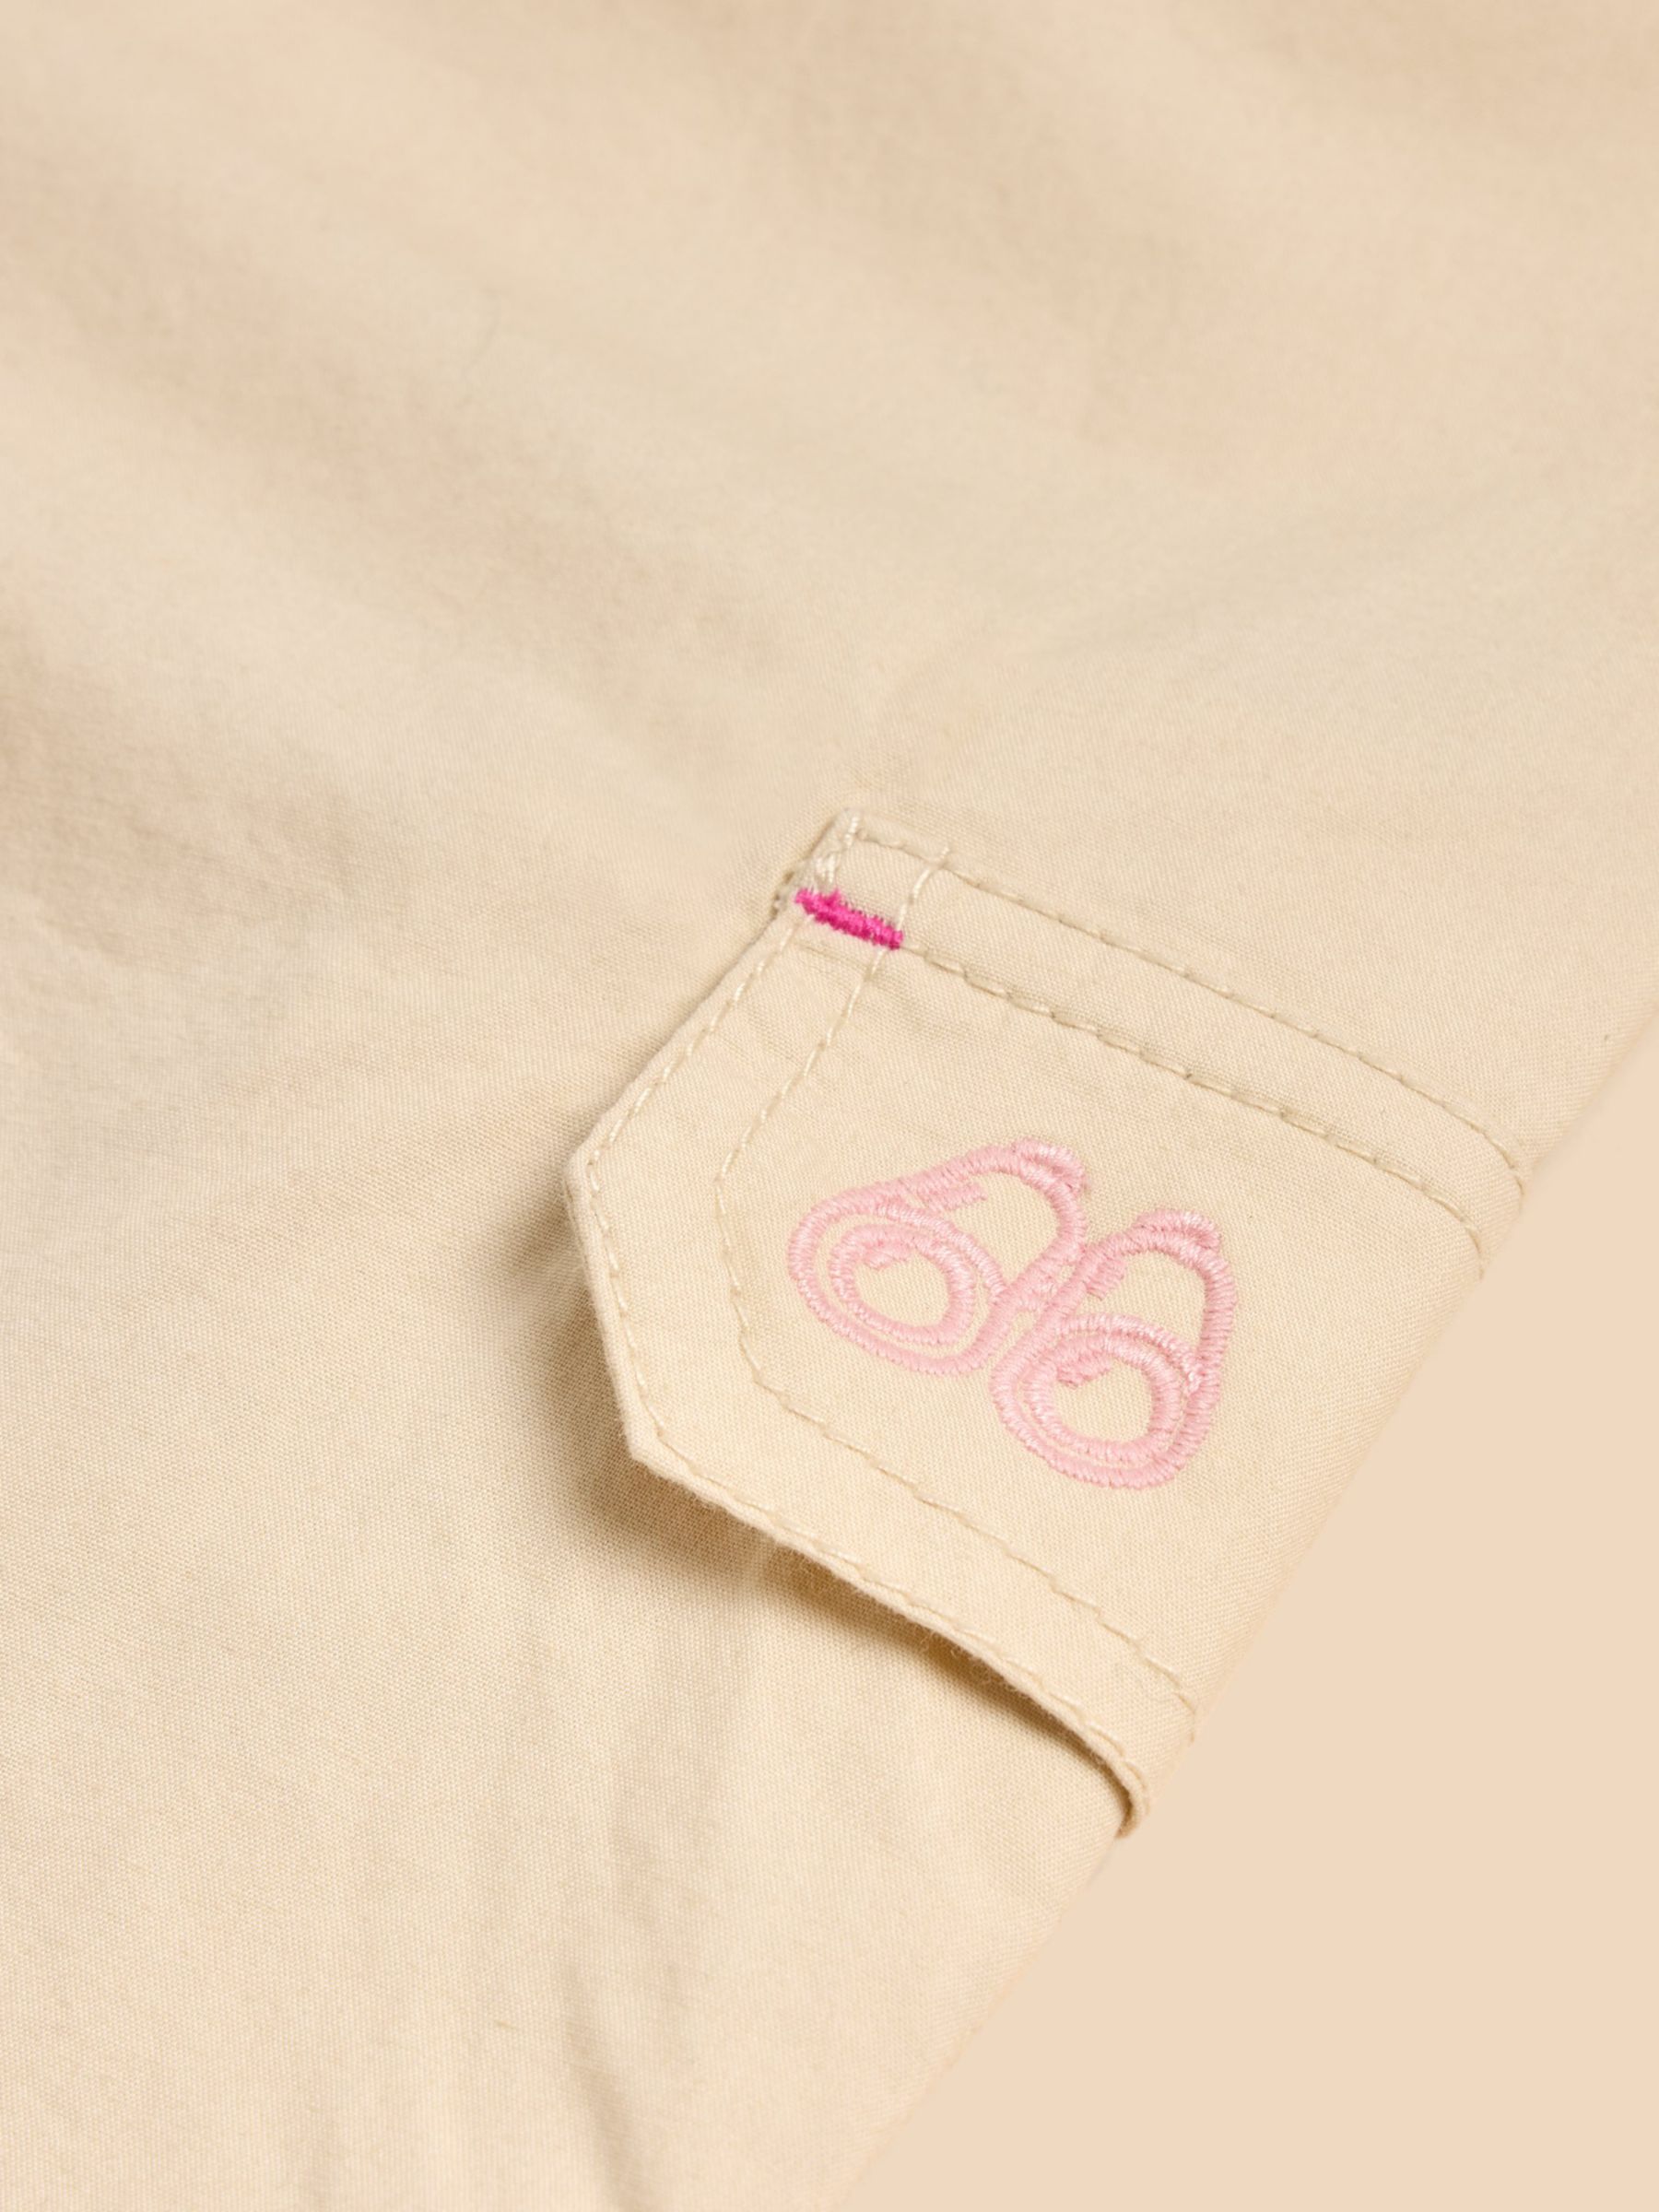 Buy White Stuff Kids' Colette Trousers, Beige Online at johnlewis.com